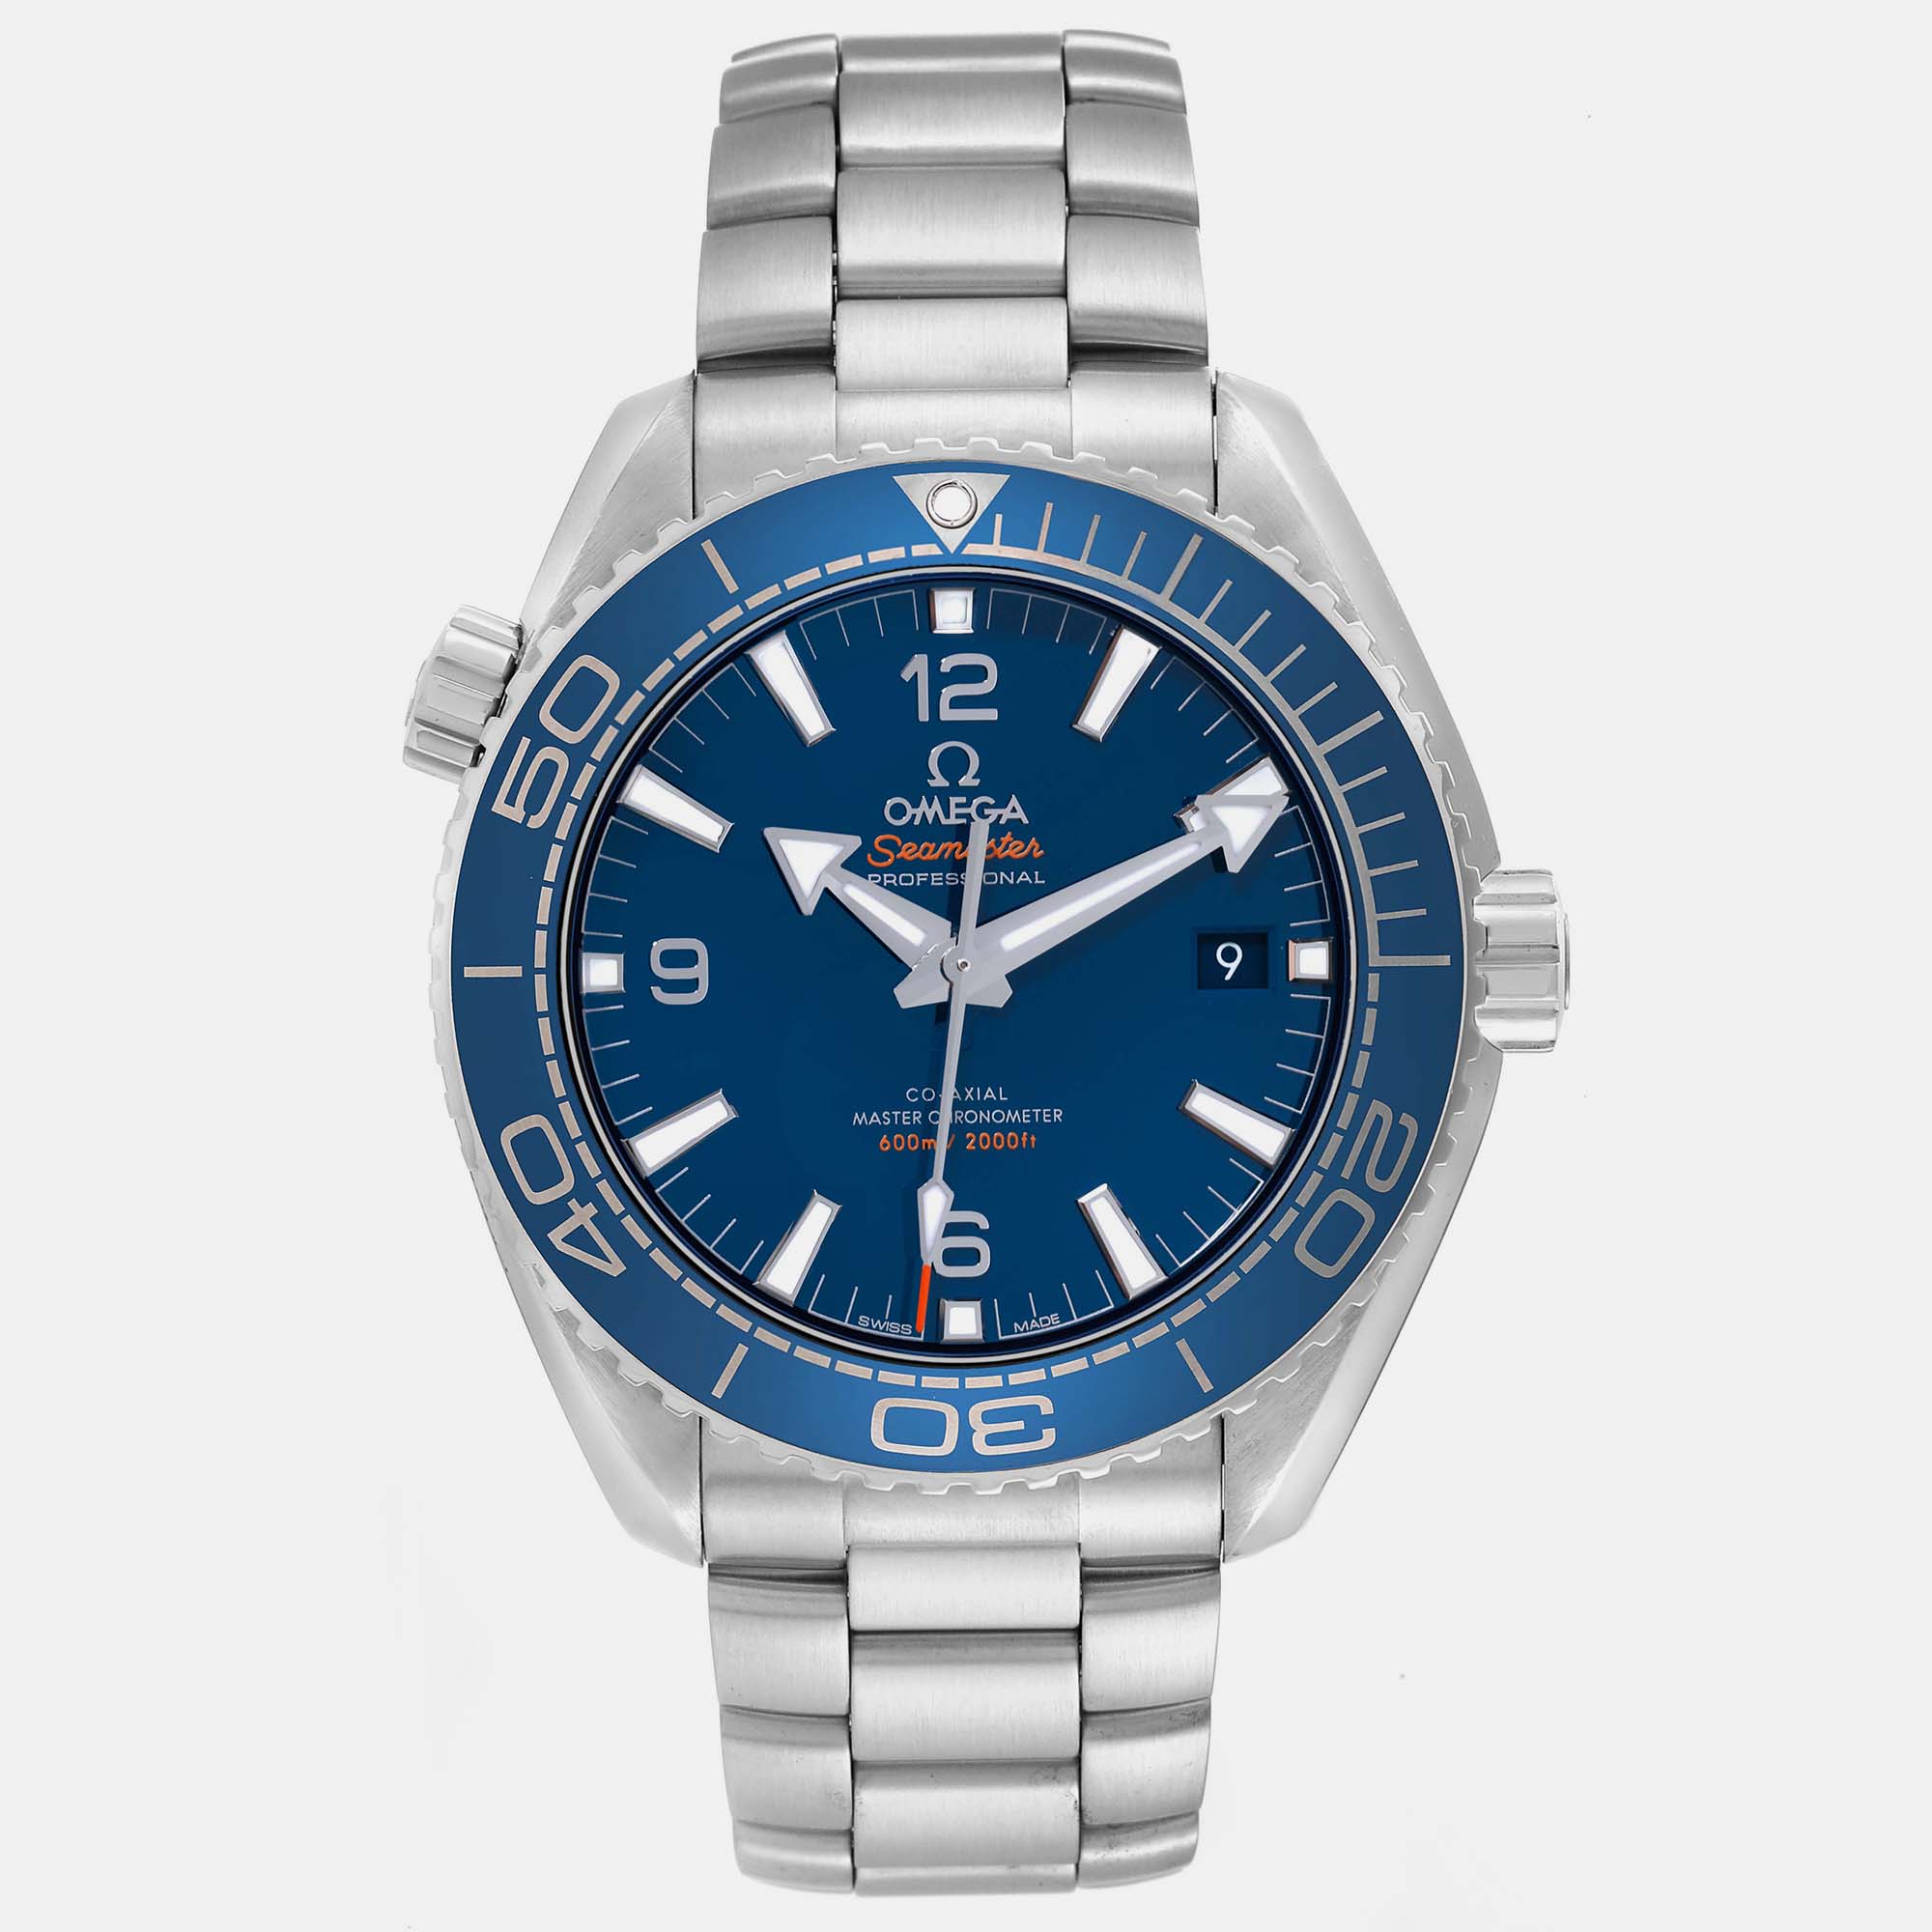 Omega blue stainless steel seamaster planet ocean 215.30.44.21.03.001 automatic men's wristwatch 43.5 mm